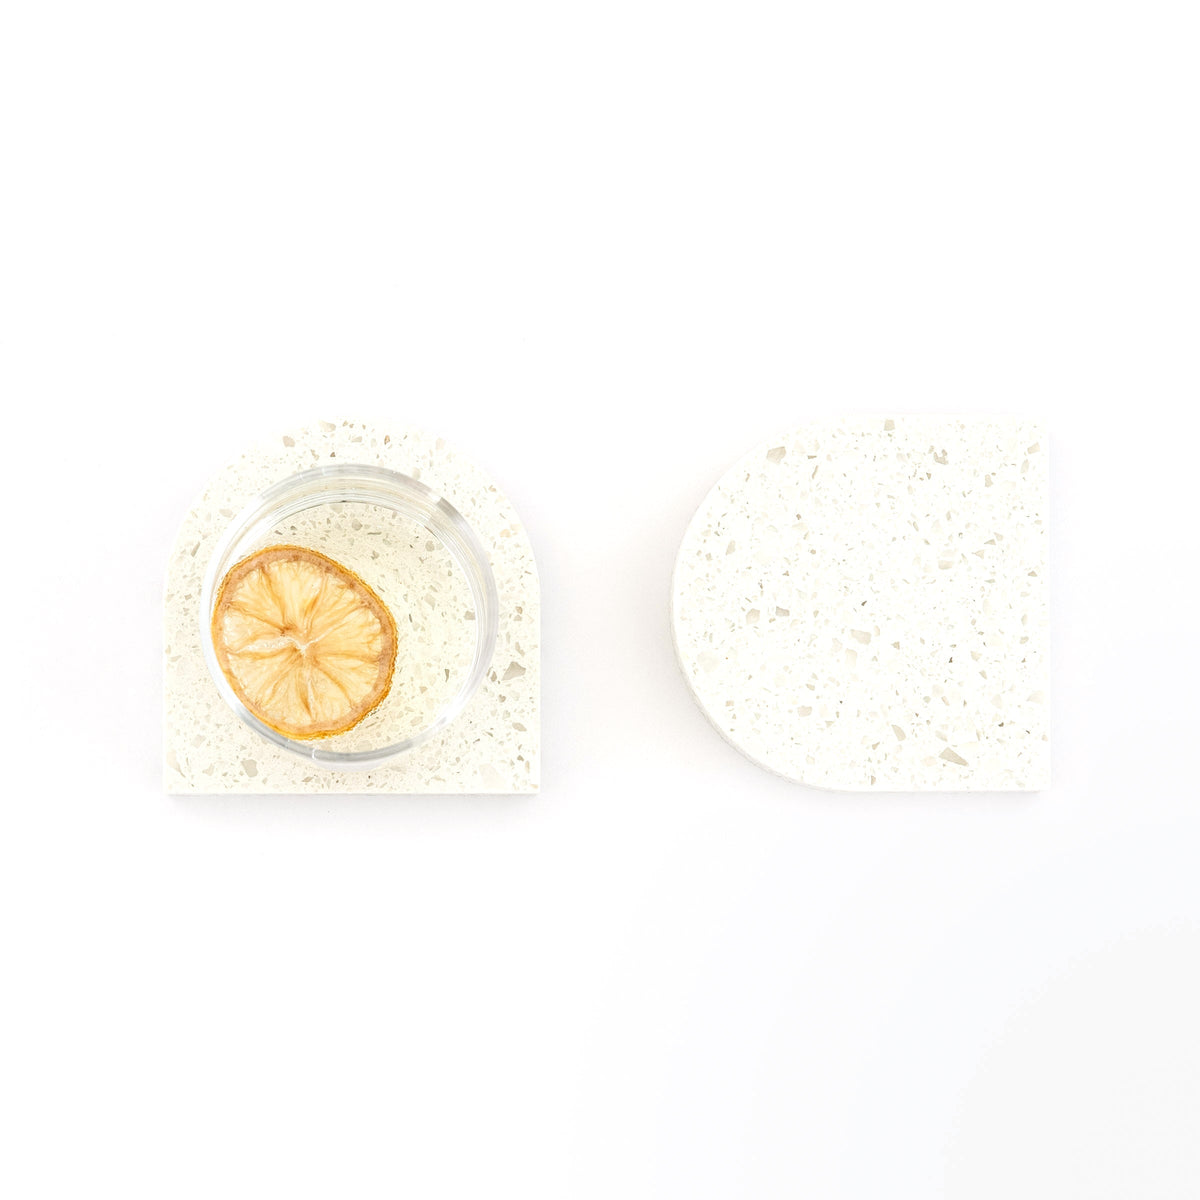 Quartz Arch Coaster™ Set 2 Piece in Nougat™. Quartz white stone coasters in an arch shape. These white quartz coasters are specked with decorative quartz with a cork backing. White marble coasters in appearance however quartz has greater scratch resistance and is lower maintenance. caesarstone quartz  